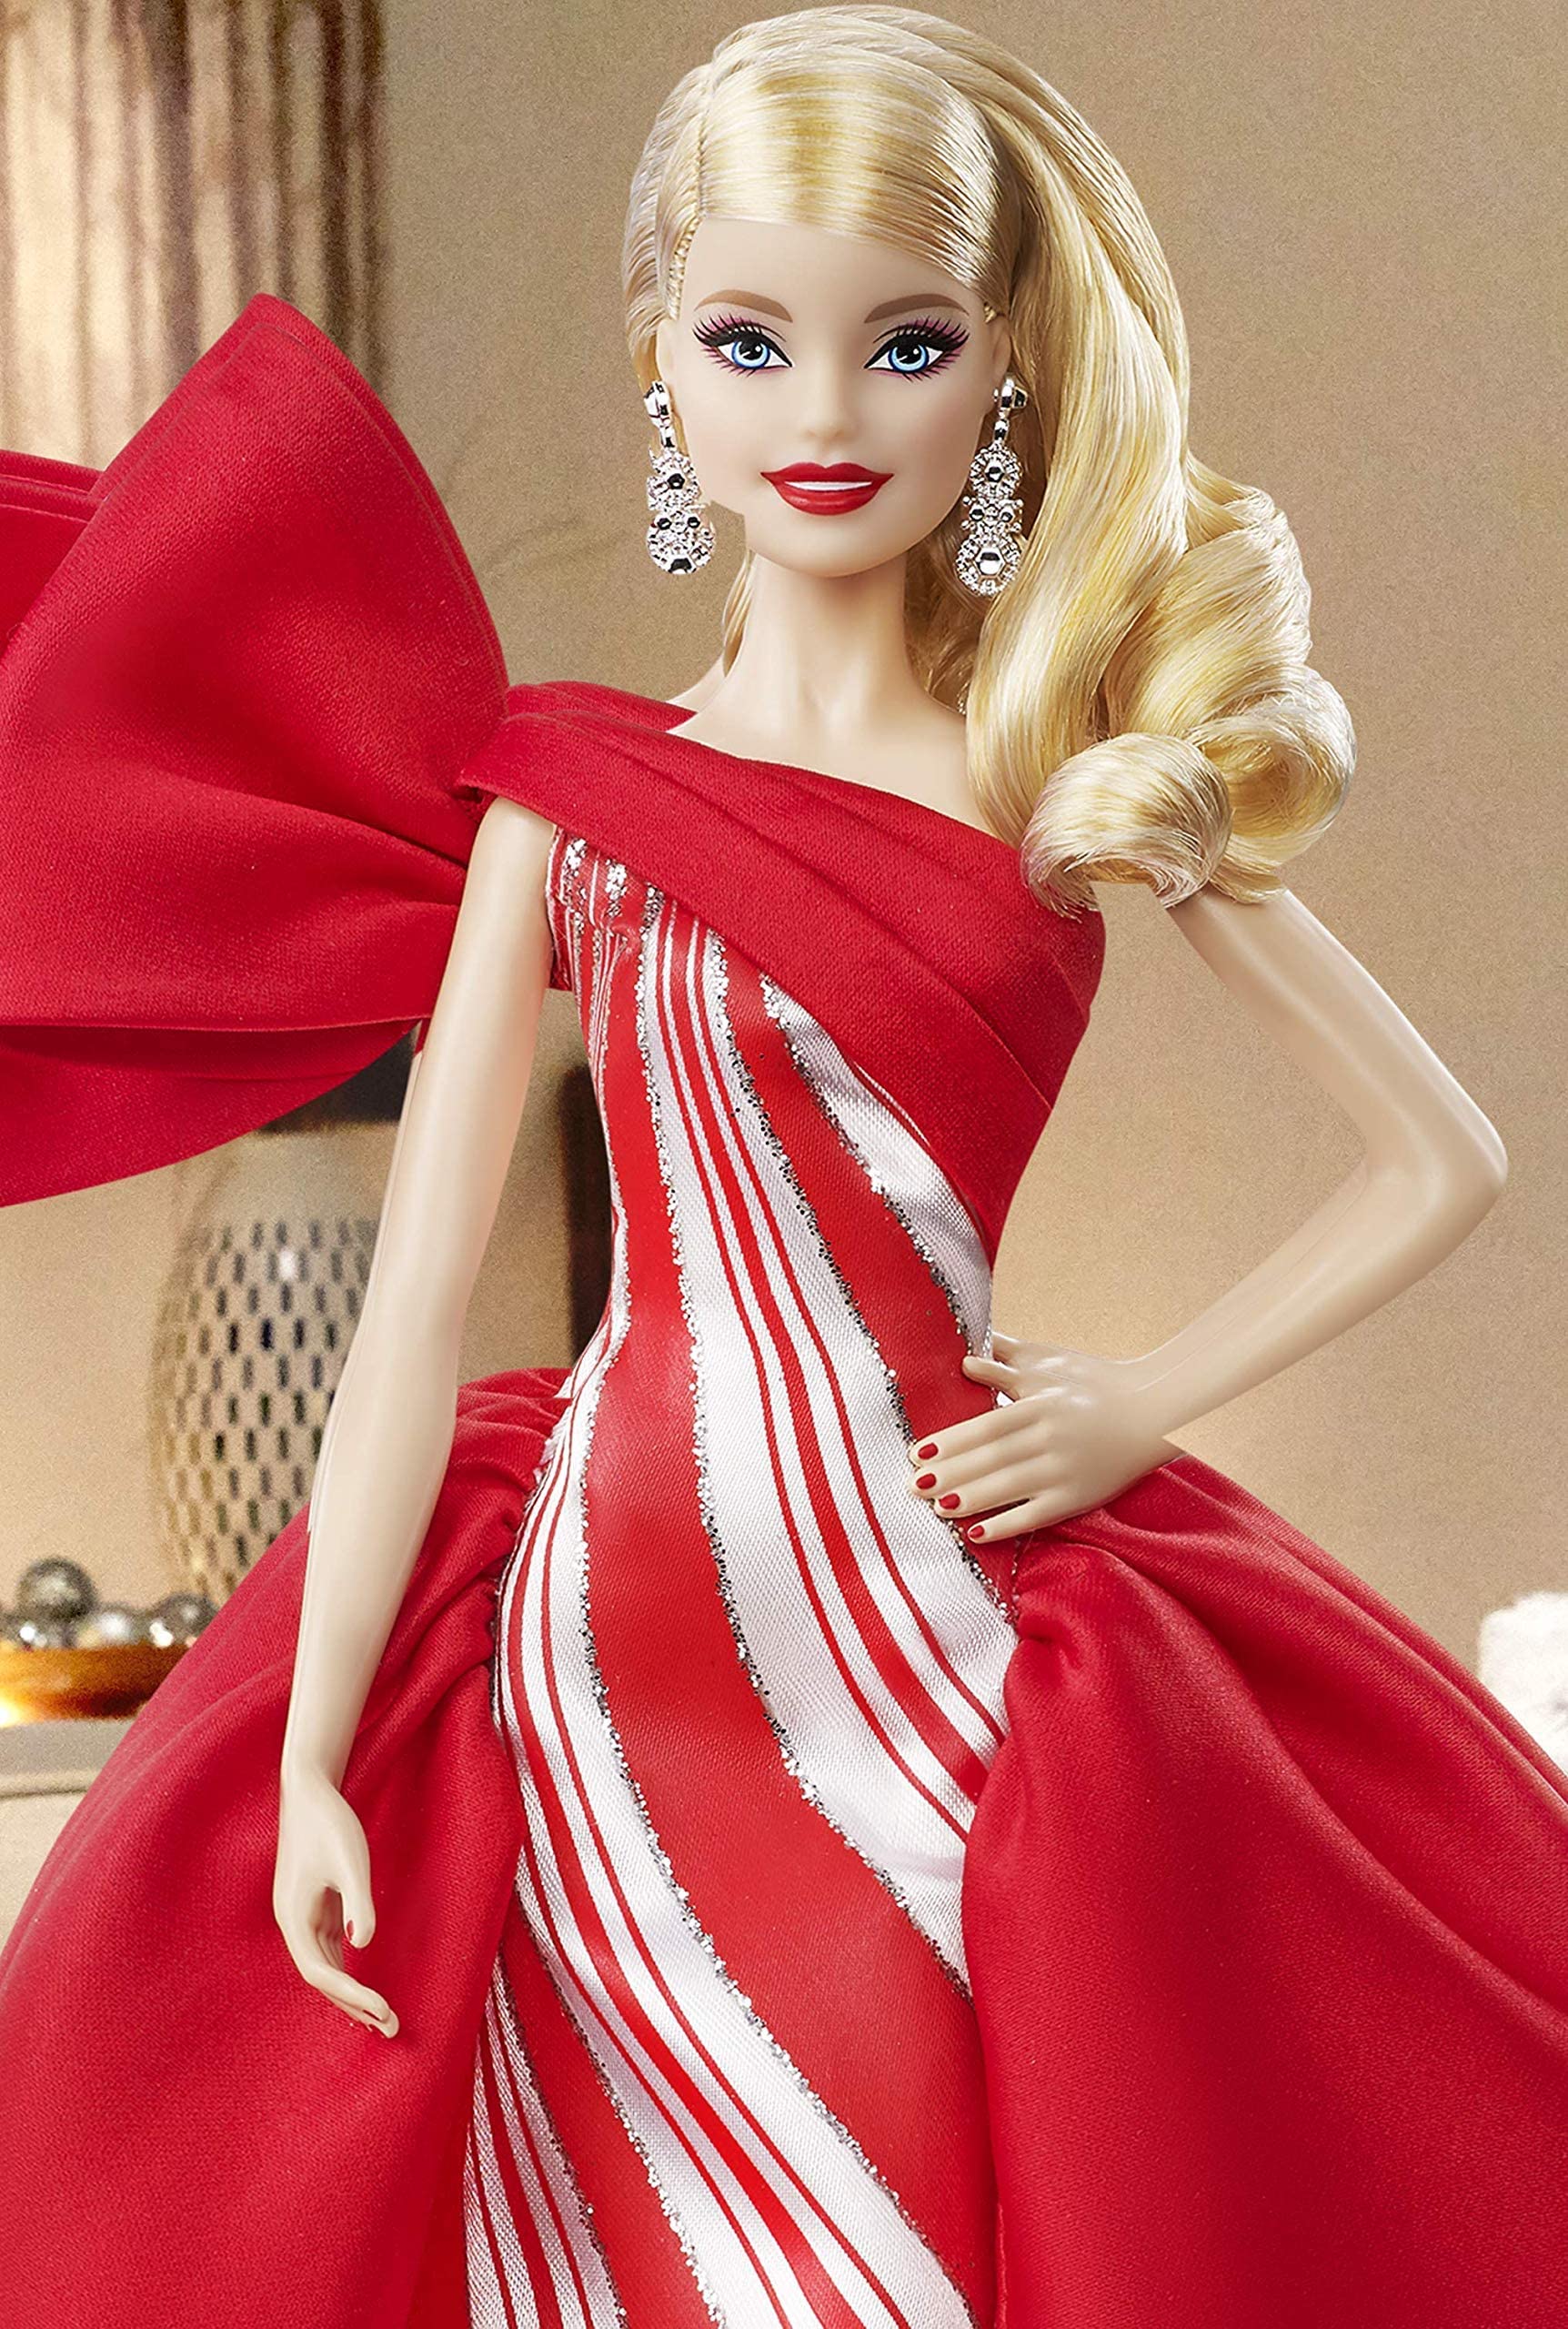 Barbie Age 6 Plus Blonde Curls With Red And White Gown Holiday Doll